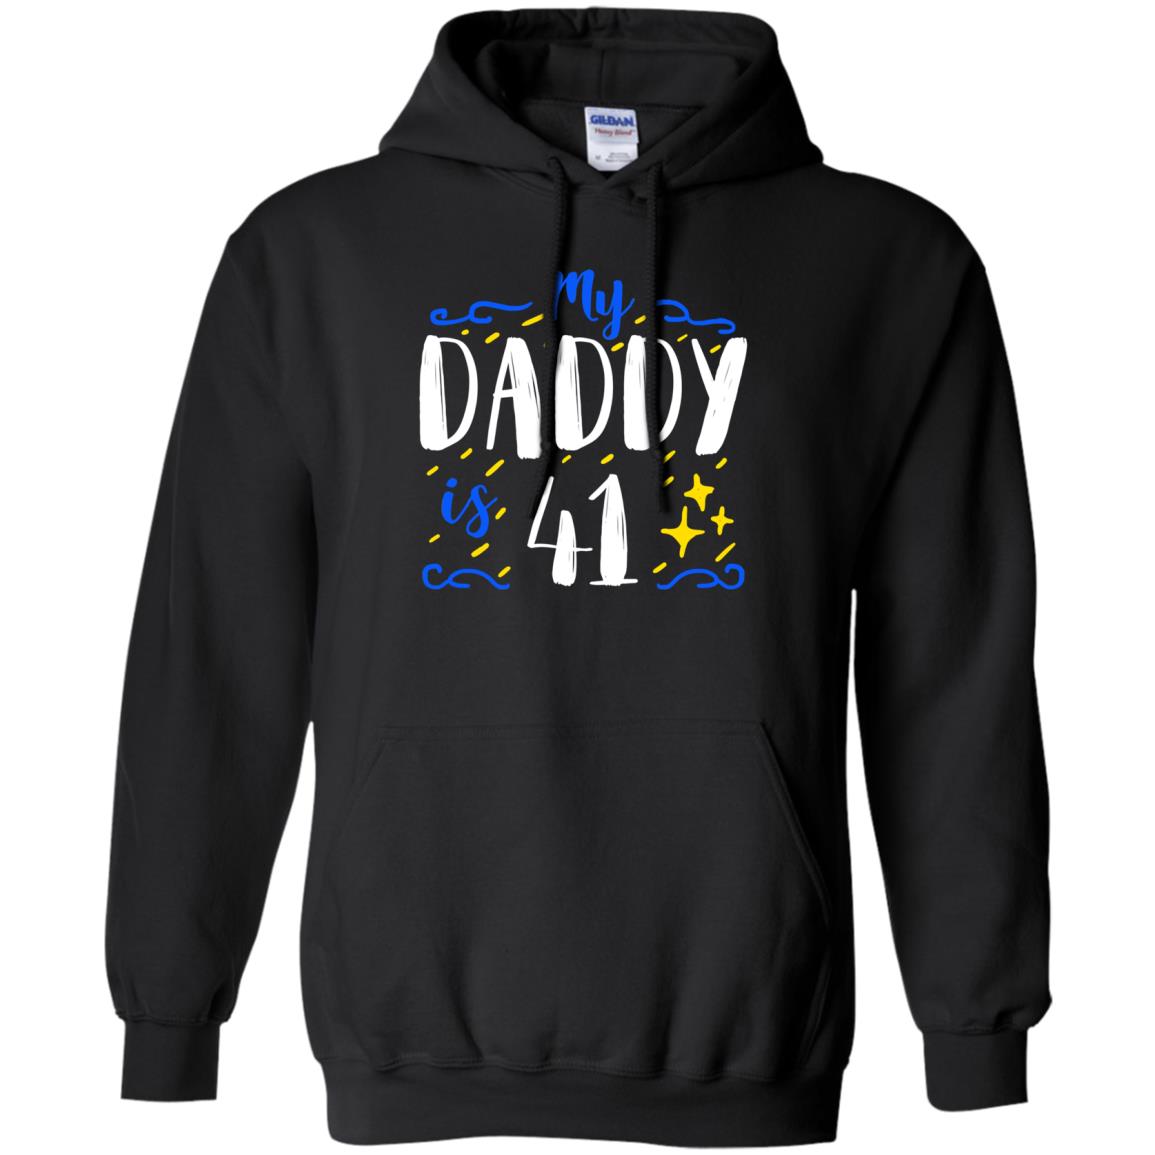 My Daddy Is 41 41st Birthday Daddy Shirt For Sons Or DaughtersG185 Gildan Pullover Hoodie 8 oz.